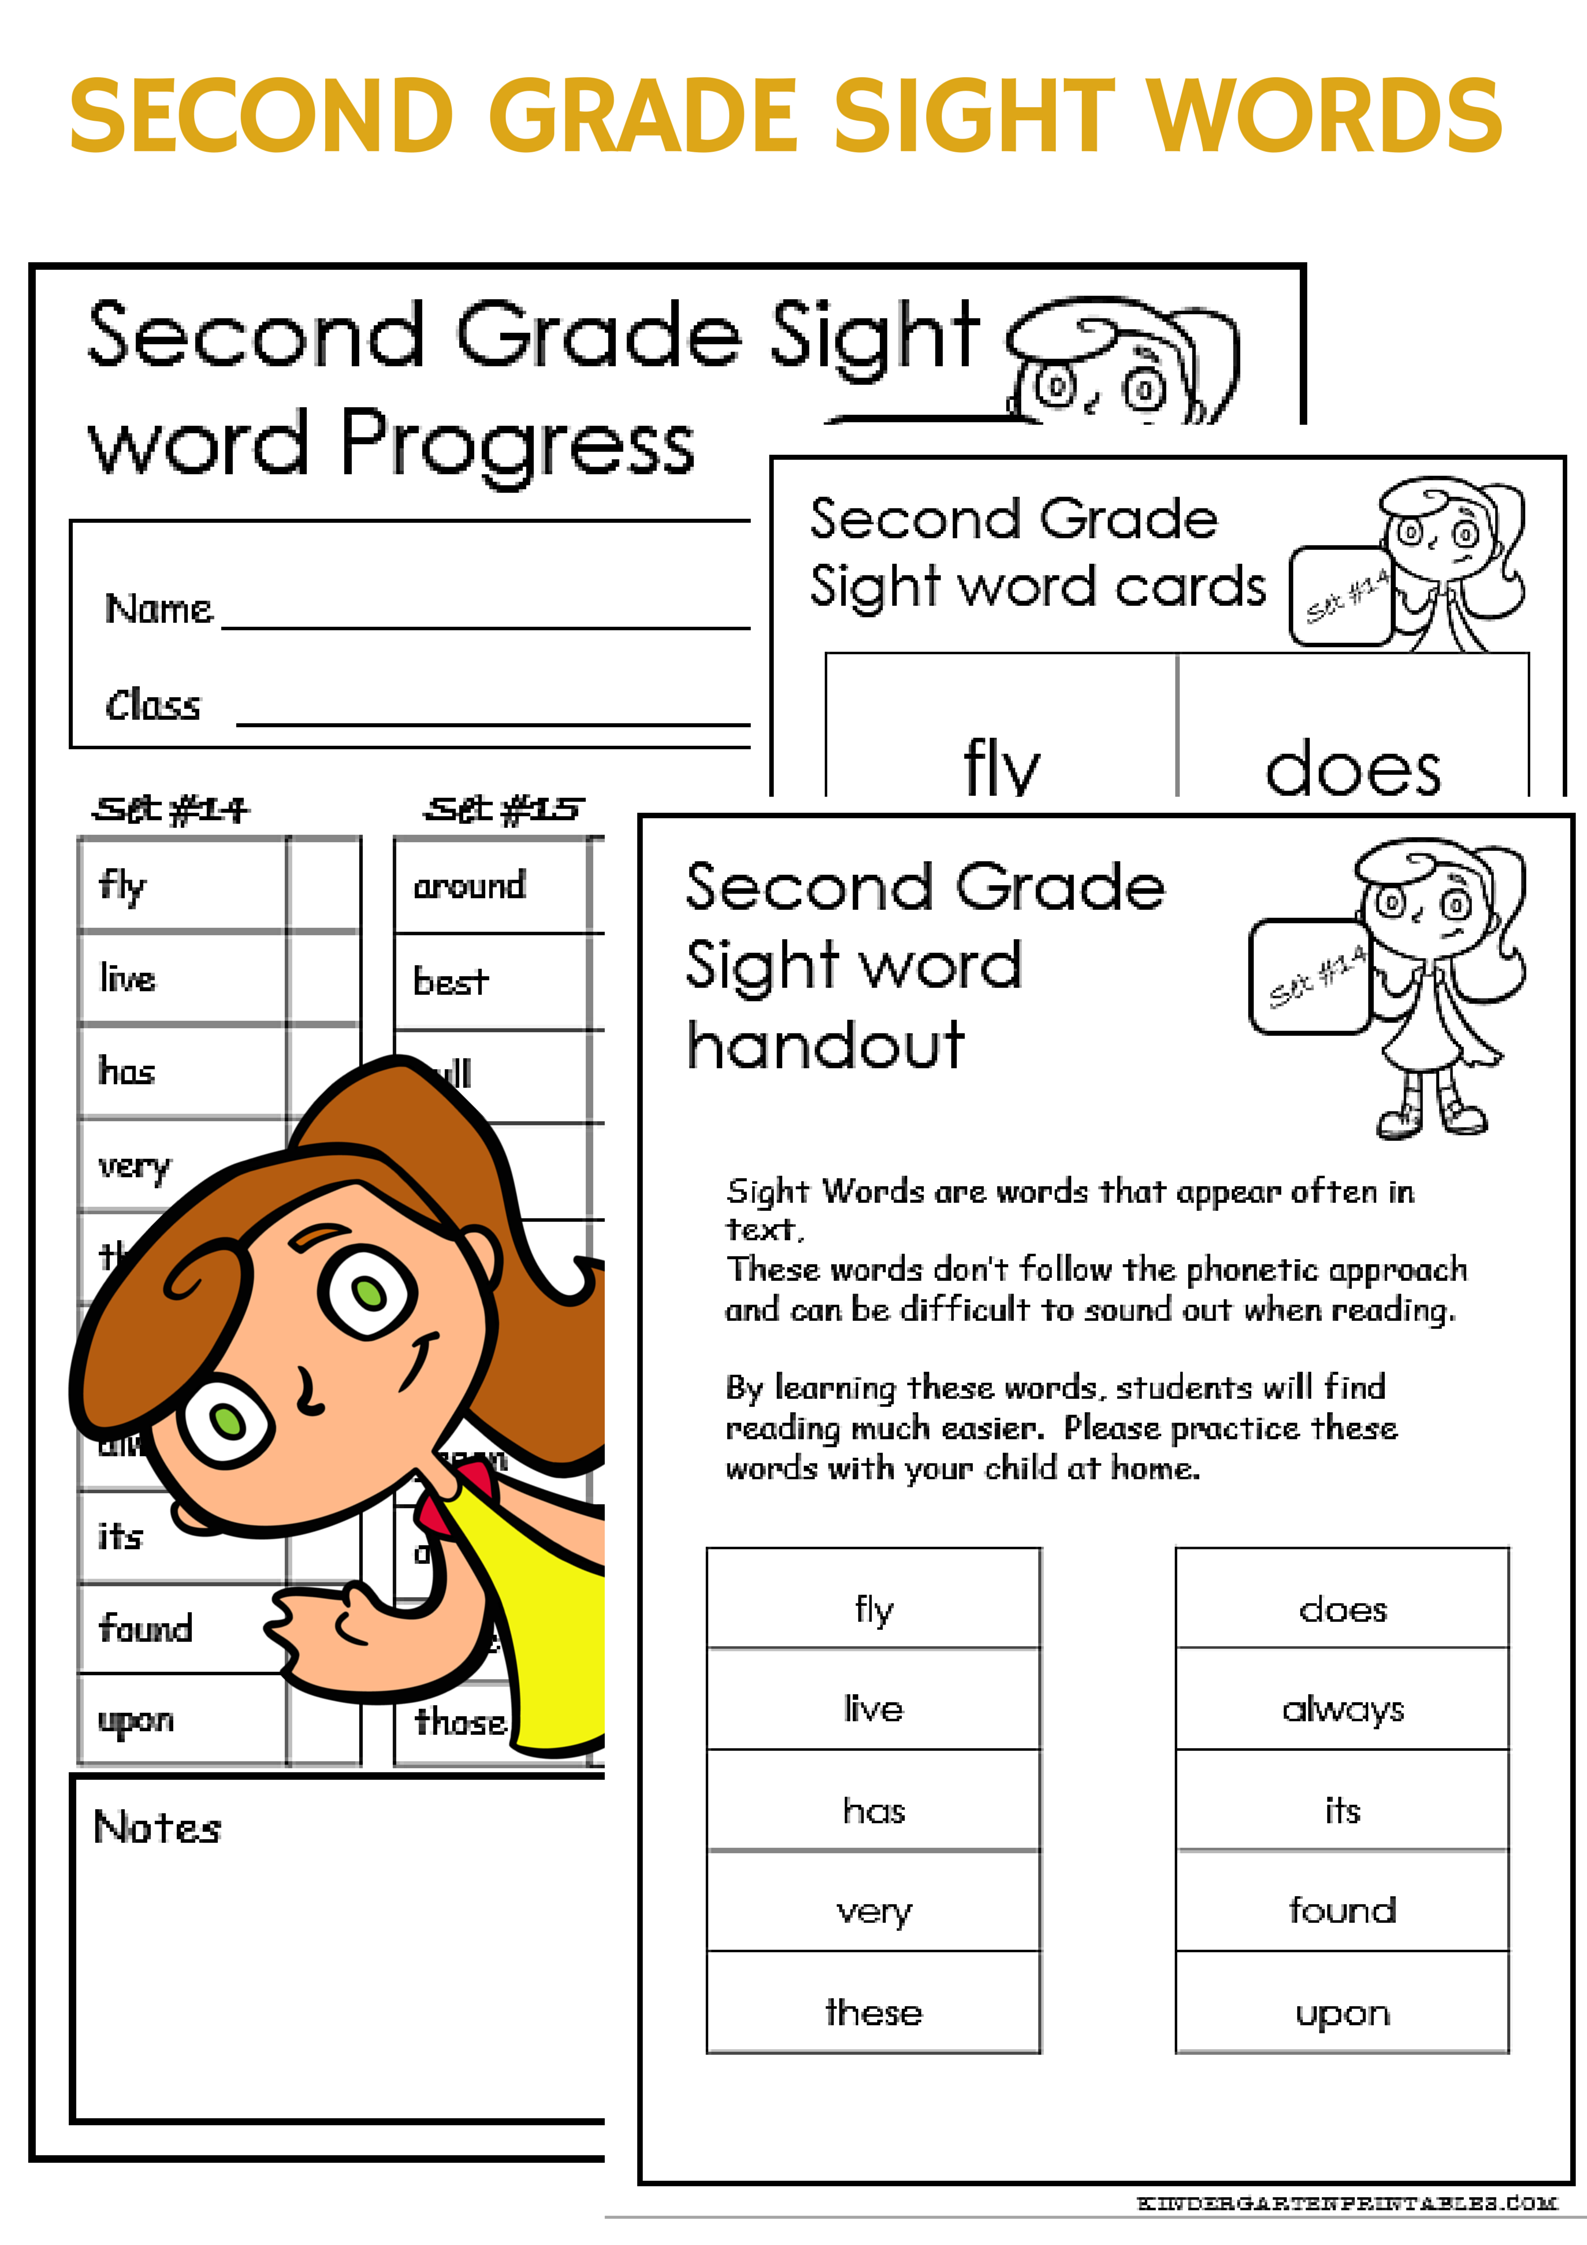 1st and 2nd grade sight words